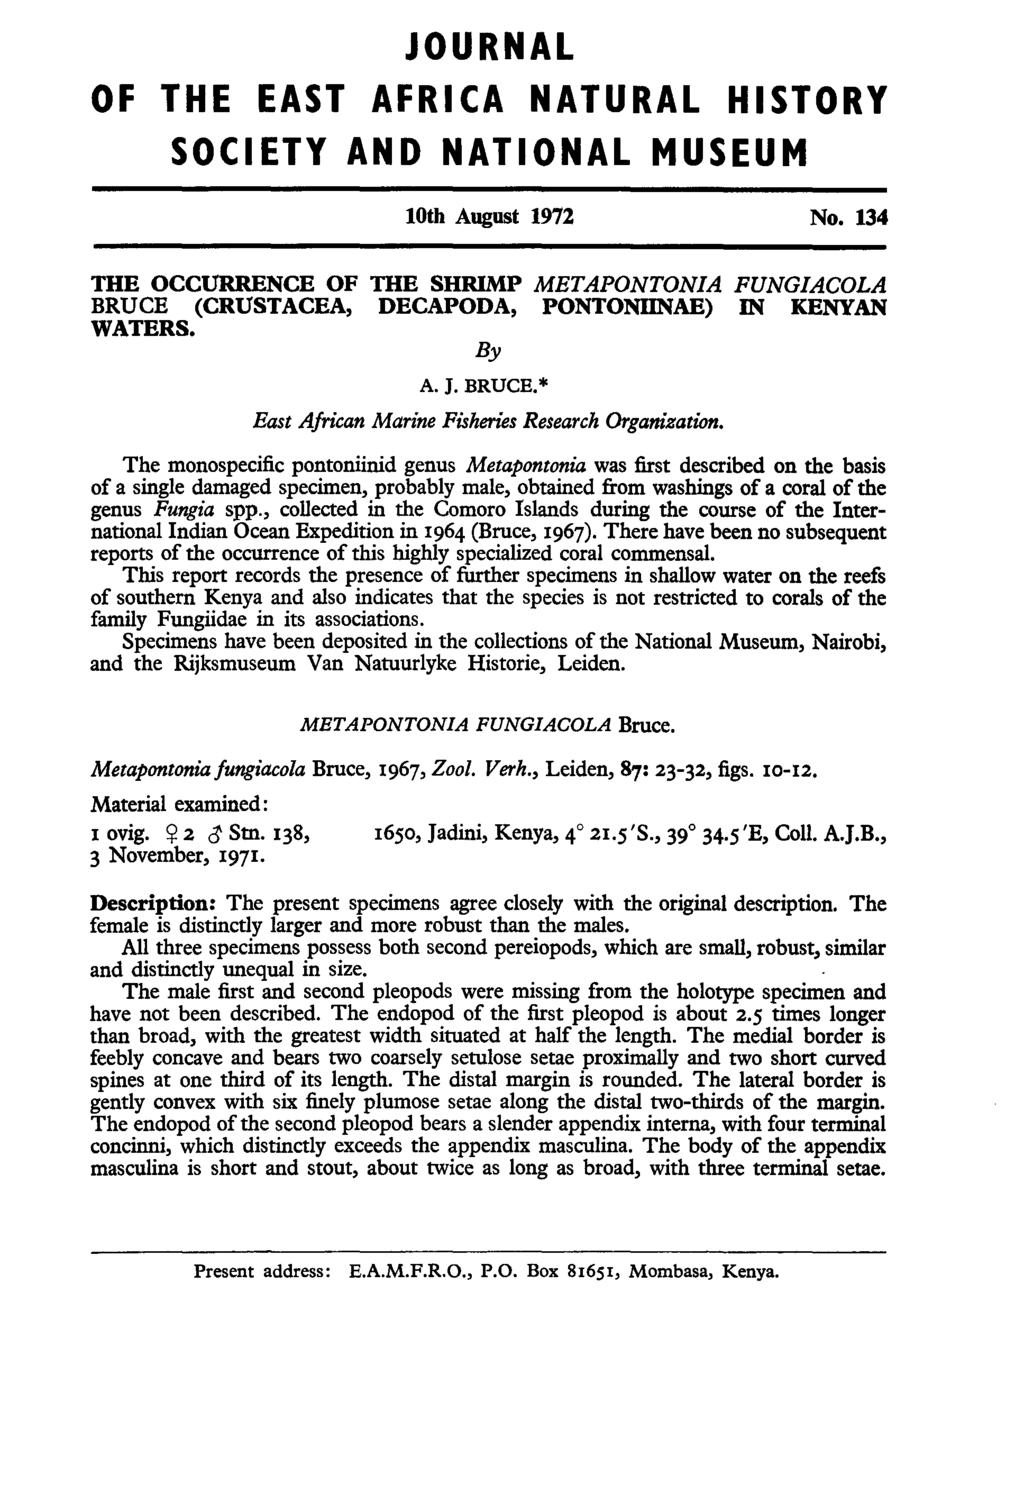 JOURNAL OF THE EAST AFRICA NATURAL HISTORY SOCIETY AND NATIONAL MUSEUM 10th August 1972 No. 134 THE OCCURRENCE OF THE SHRIMP MET APONTONIA FUNGIACOLA BRUCE (CRUSTACEA, WATERS.